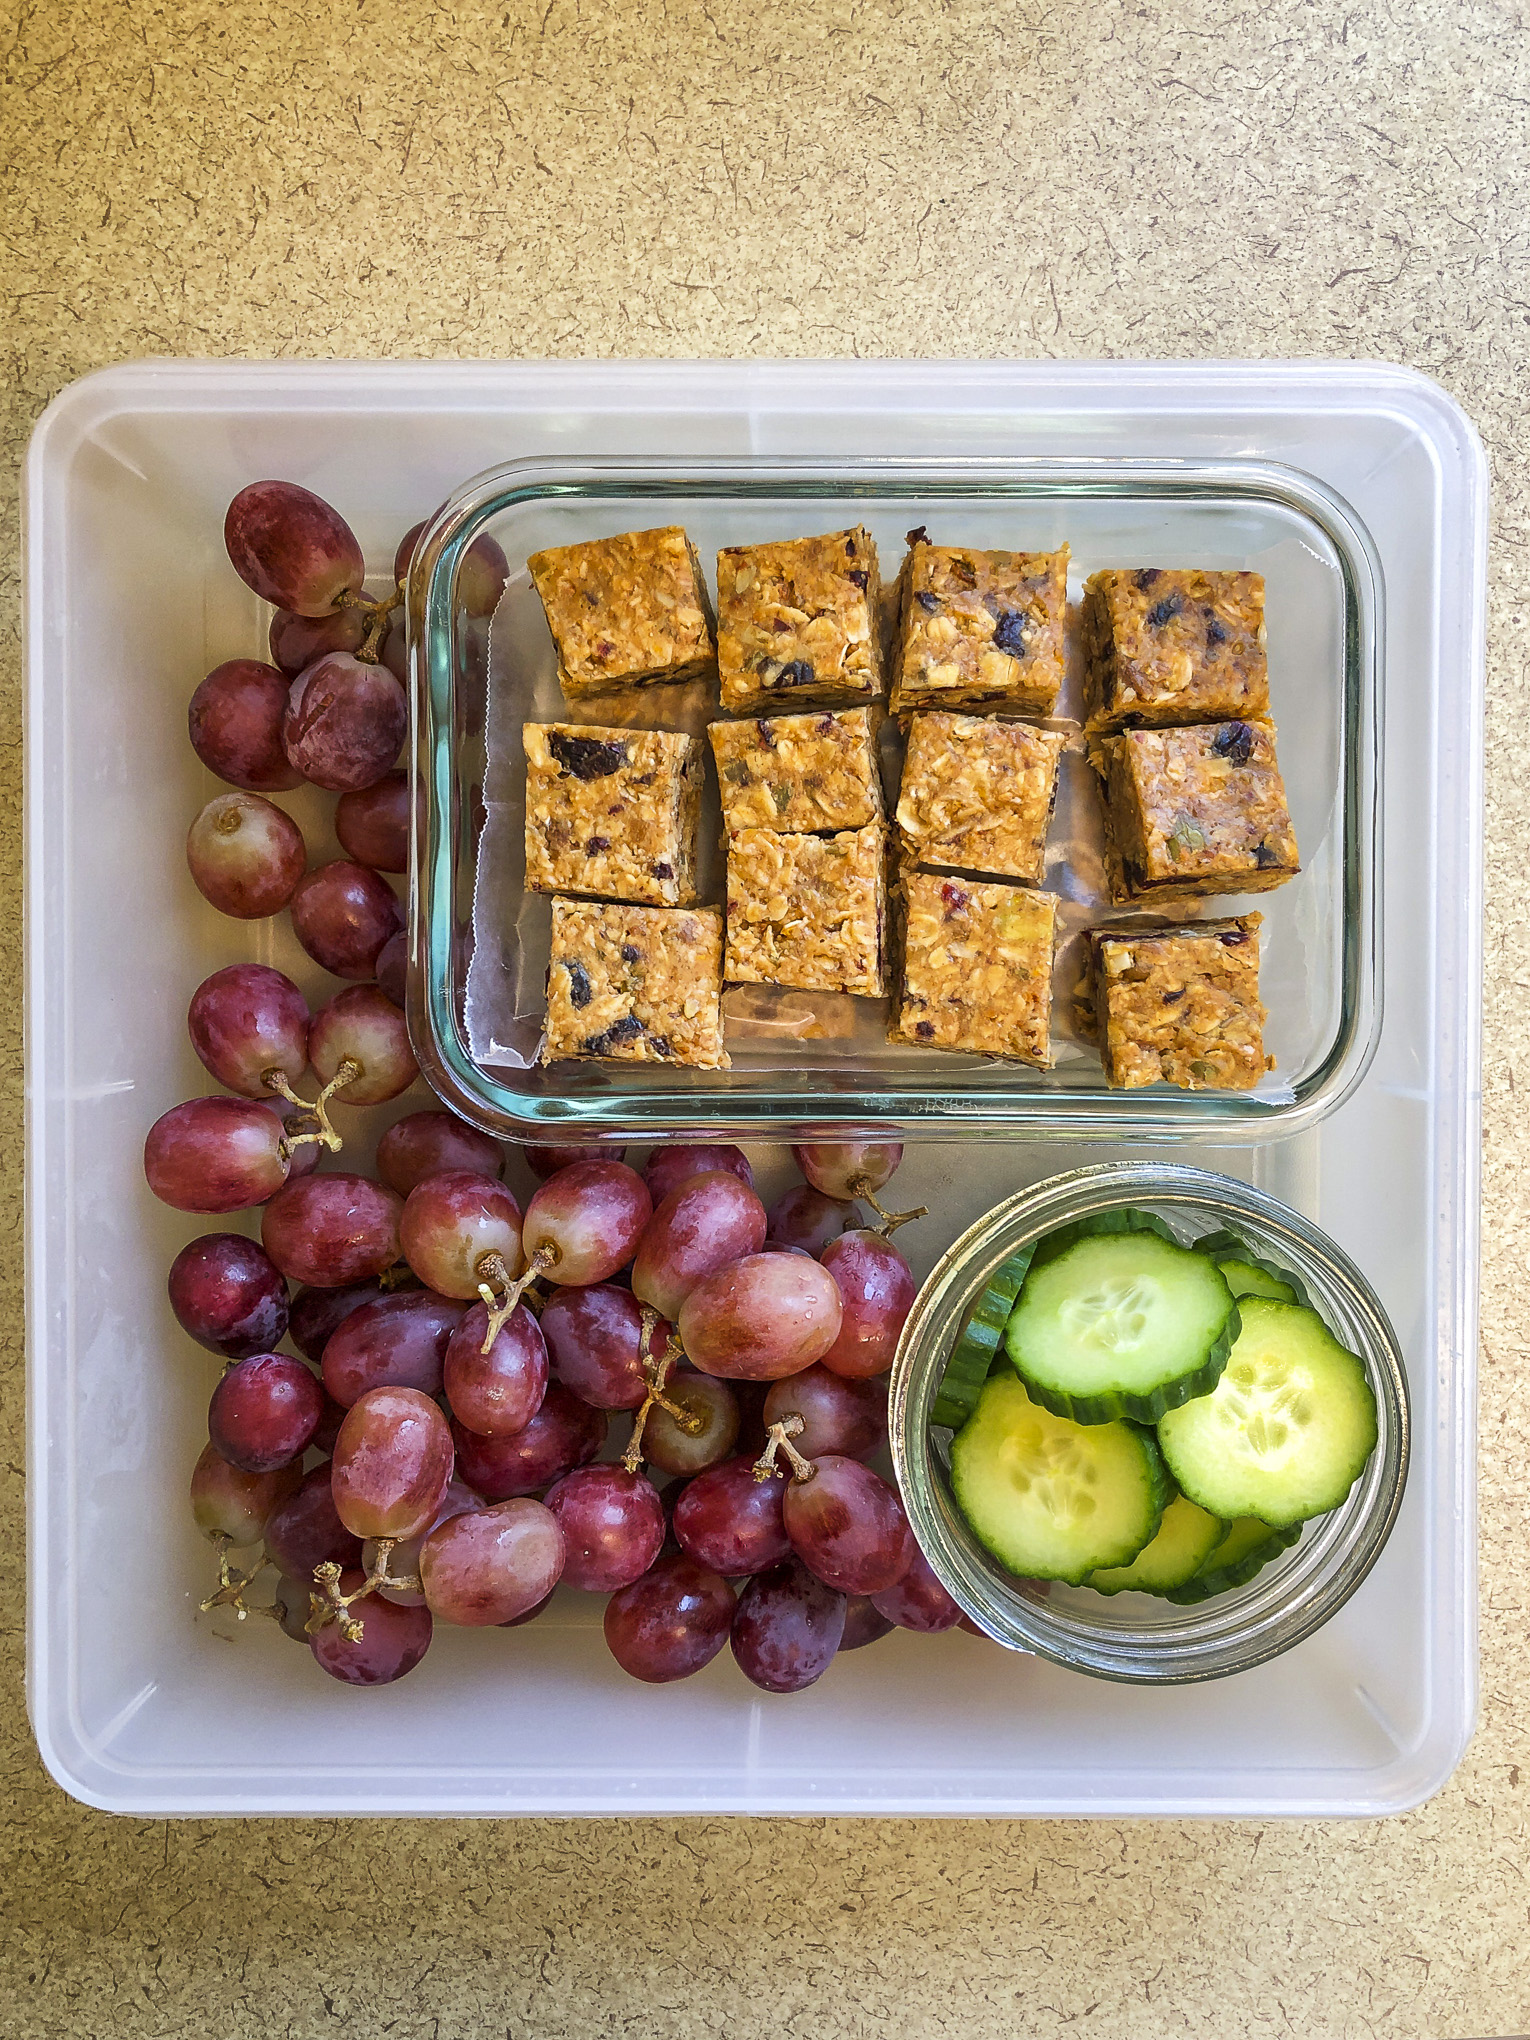 Tupperware filled with granola bars, cucumbers and grapes